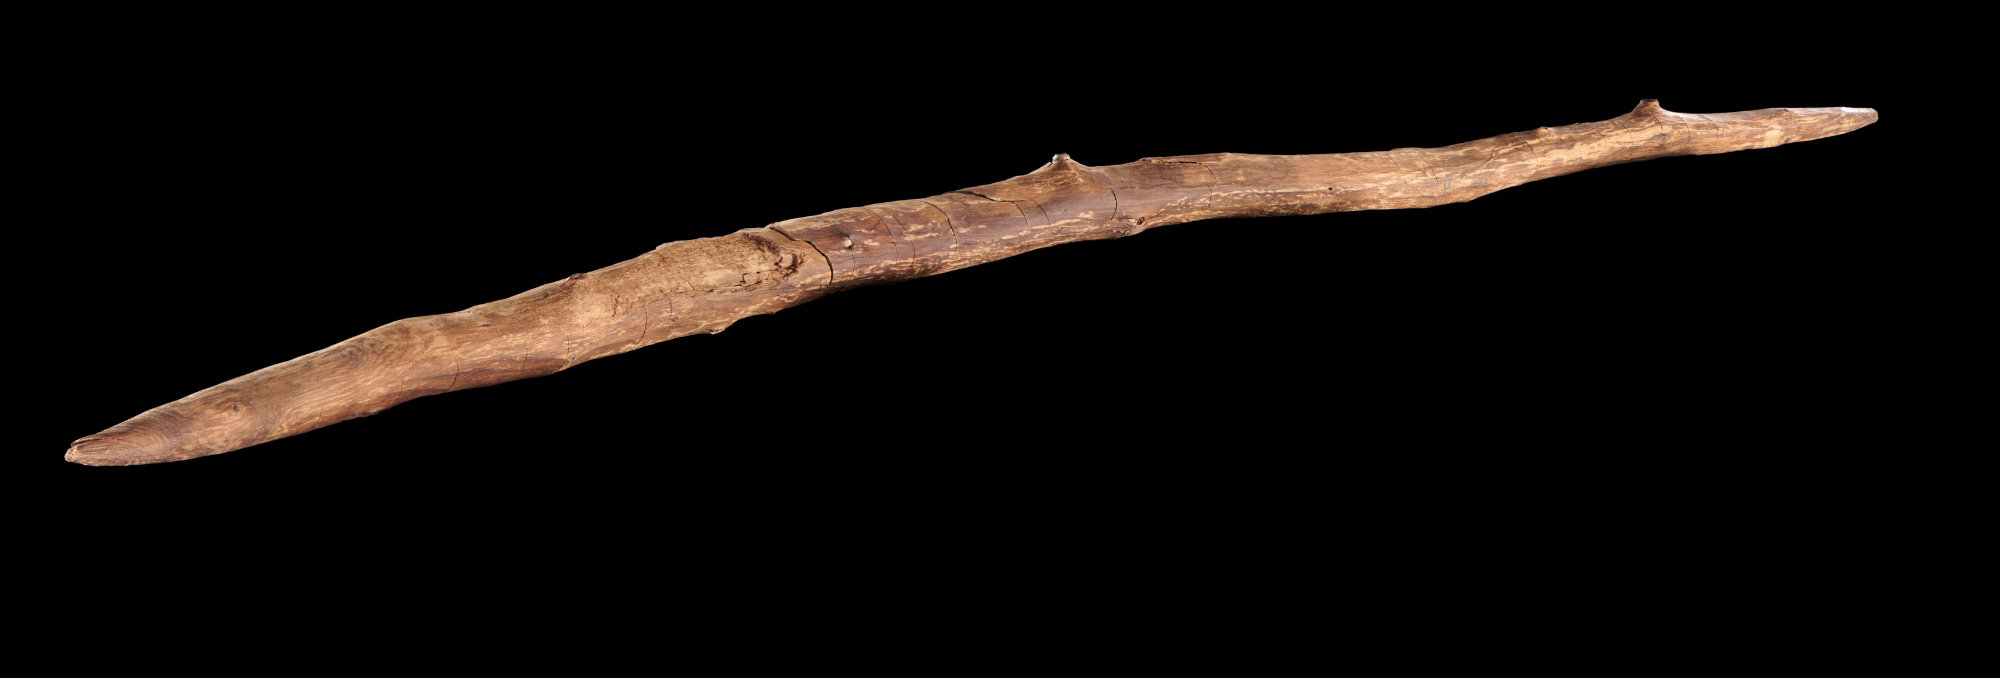 Technological secrets from 300,000 BC: How a stick has revealed